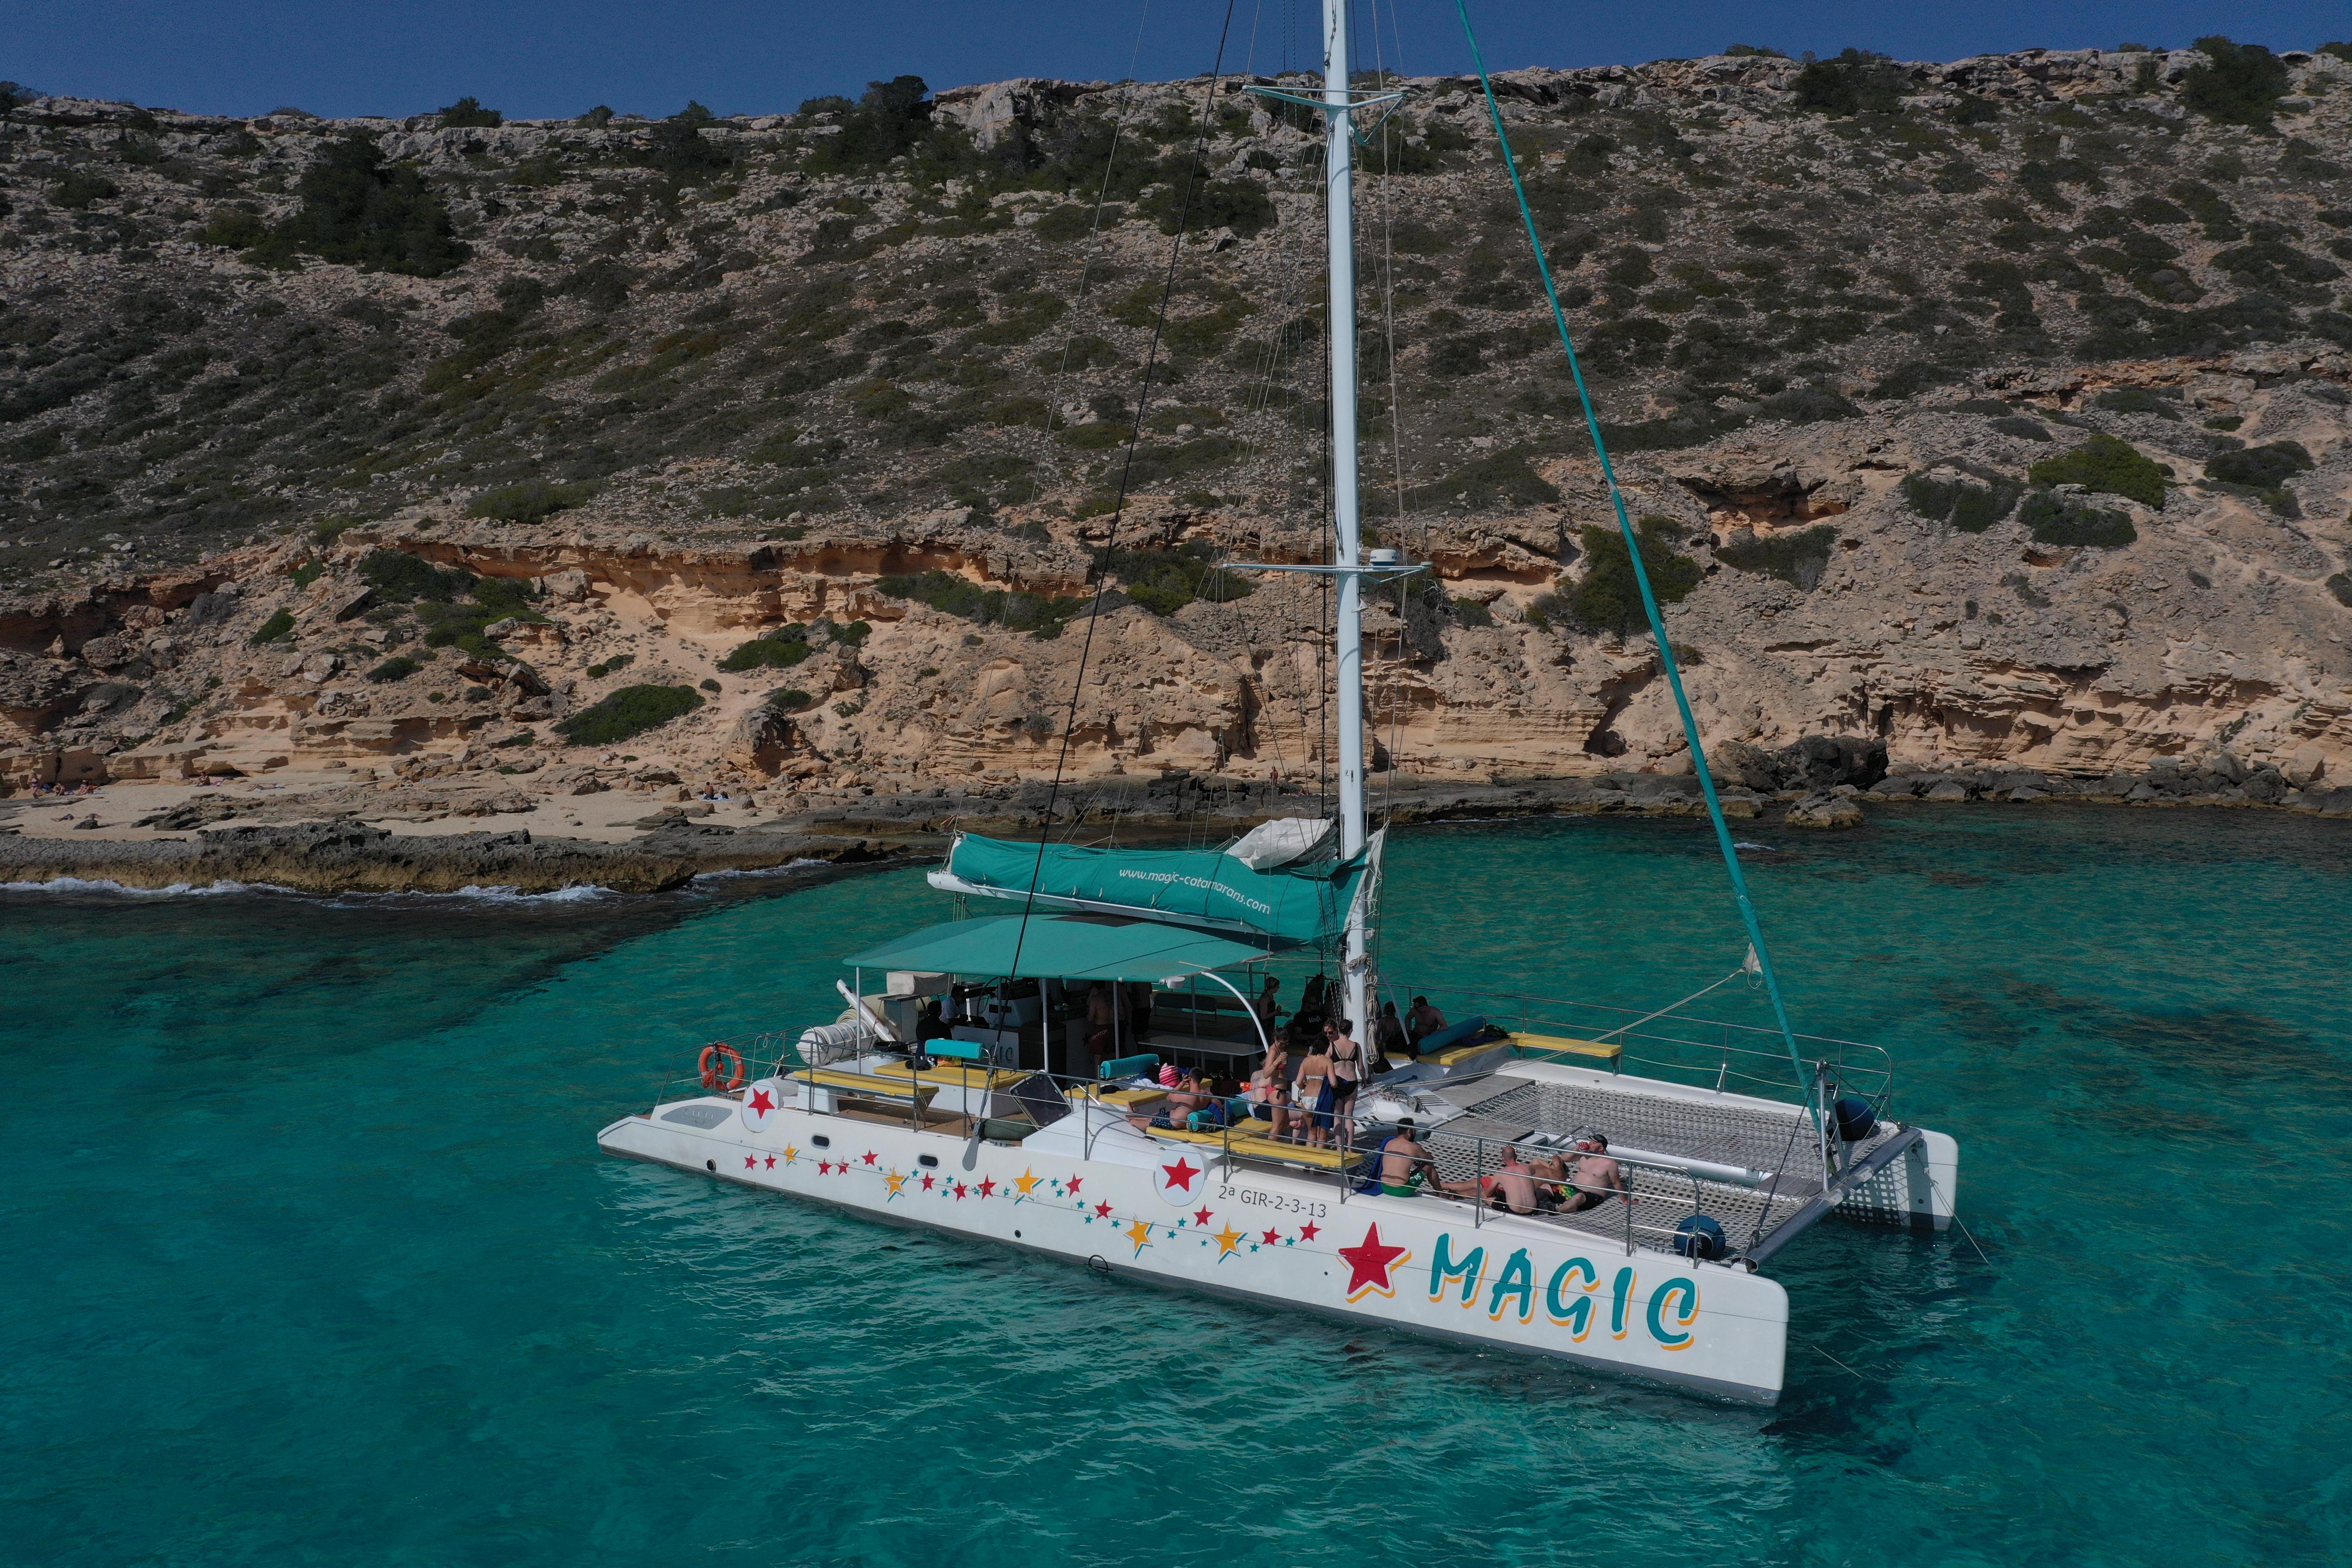 Book a group boat tour in Mallorca